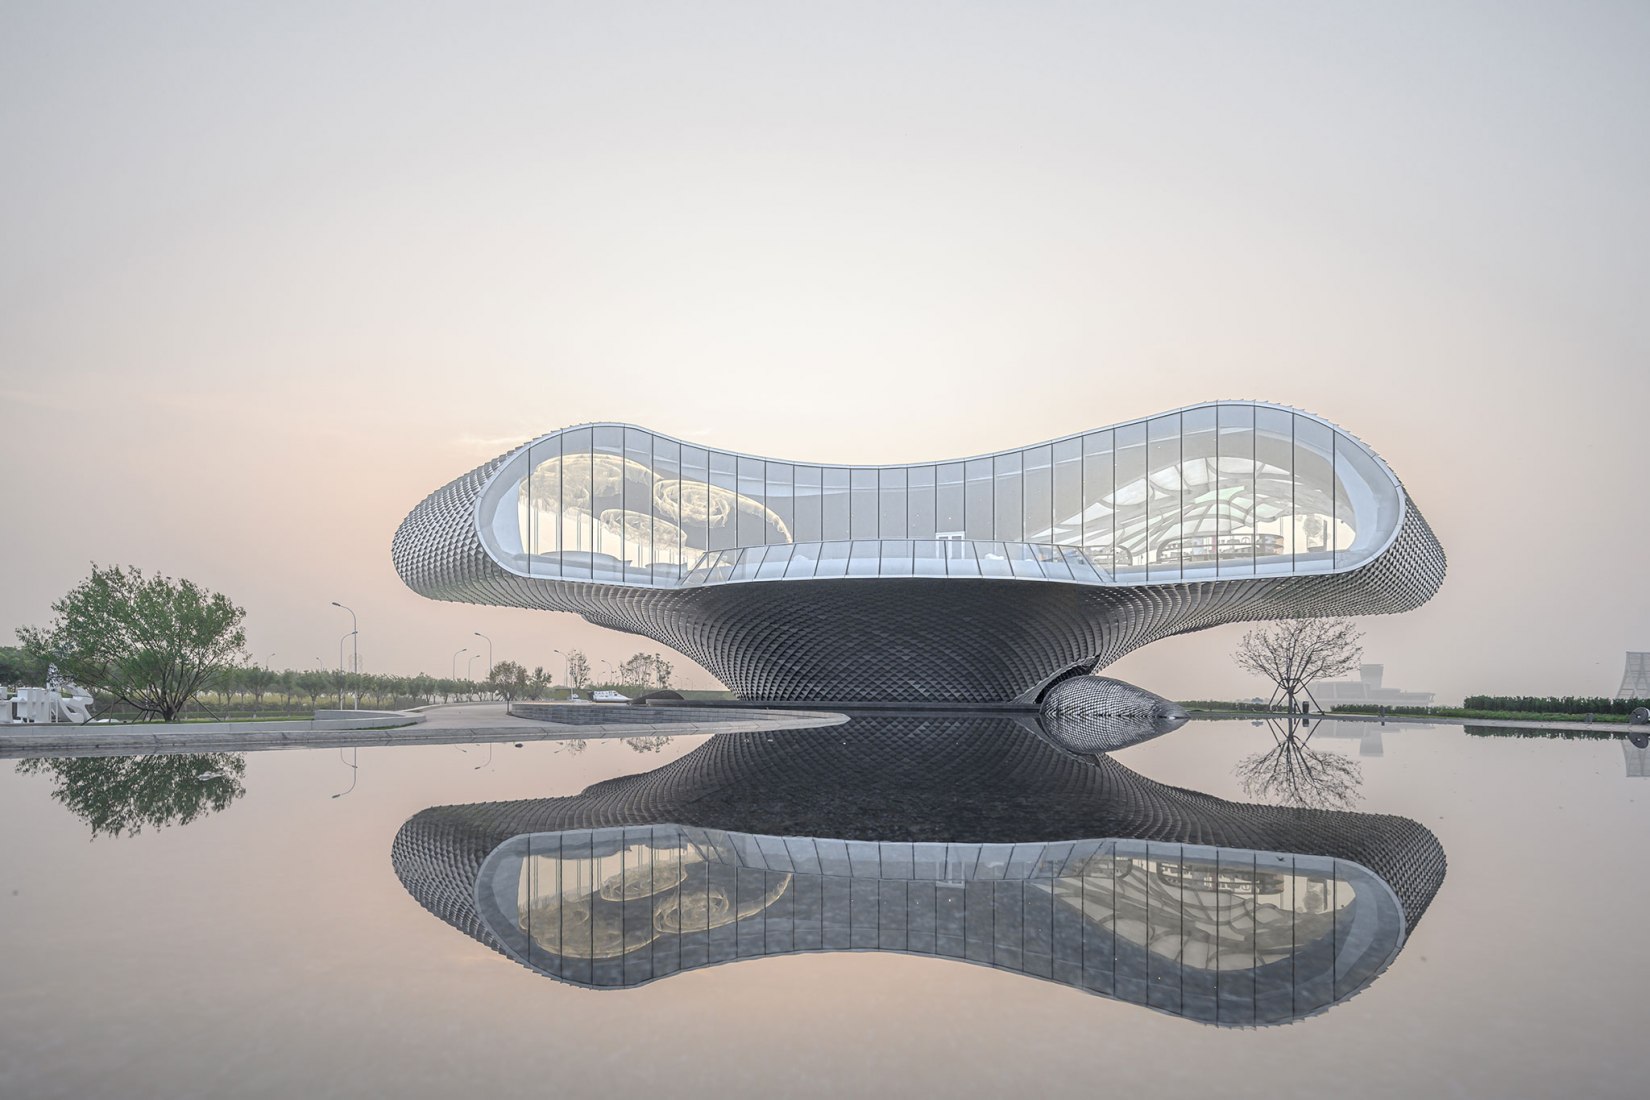 Shimao-The Wave by Lacime Architects. Photograph by CAAI